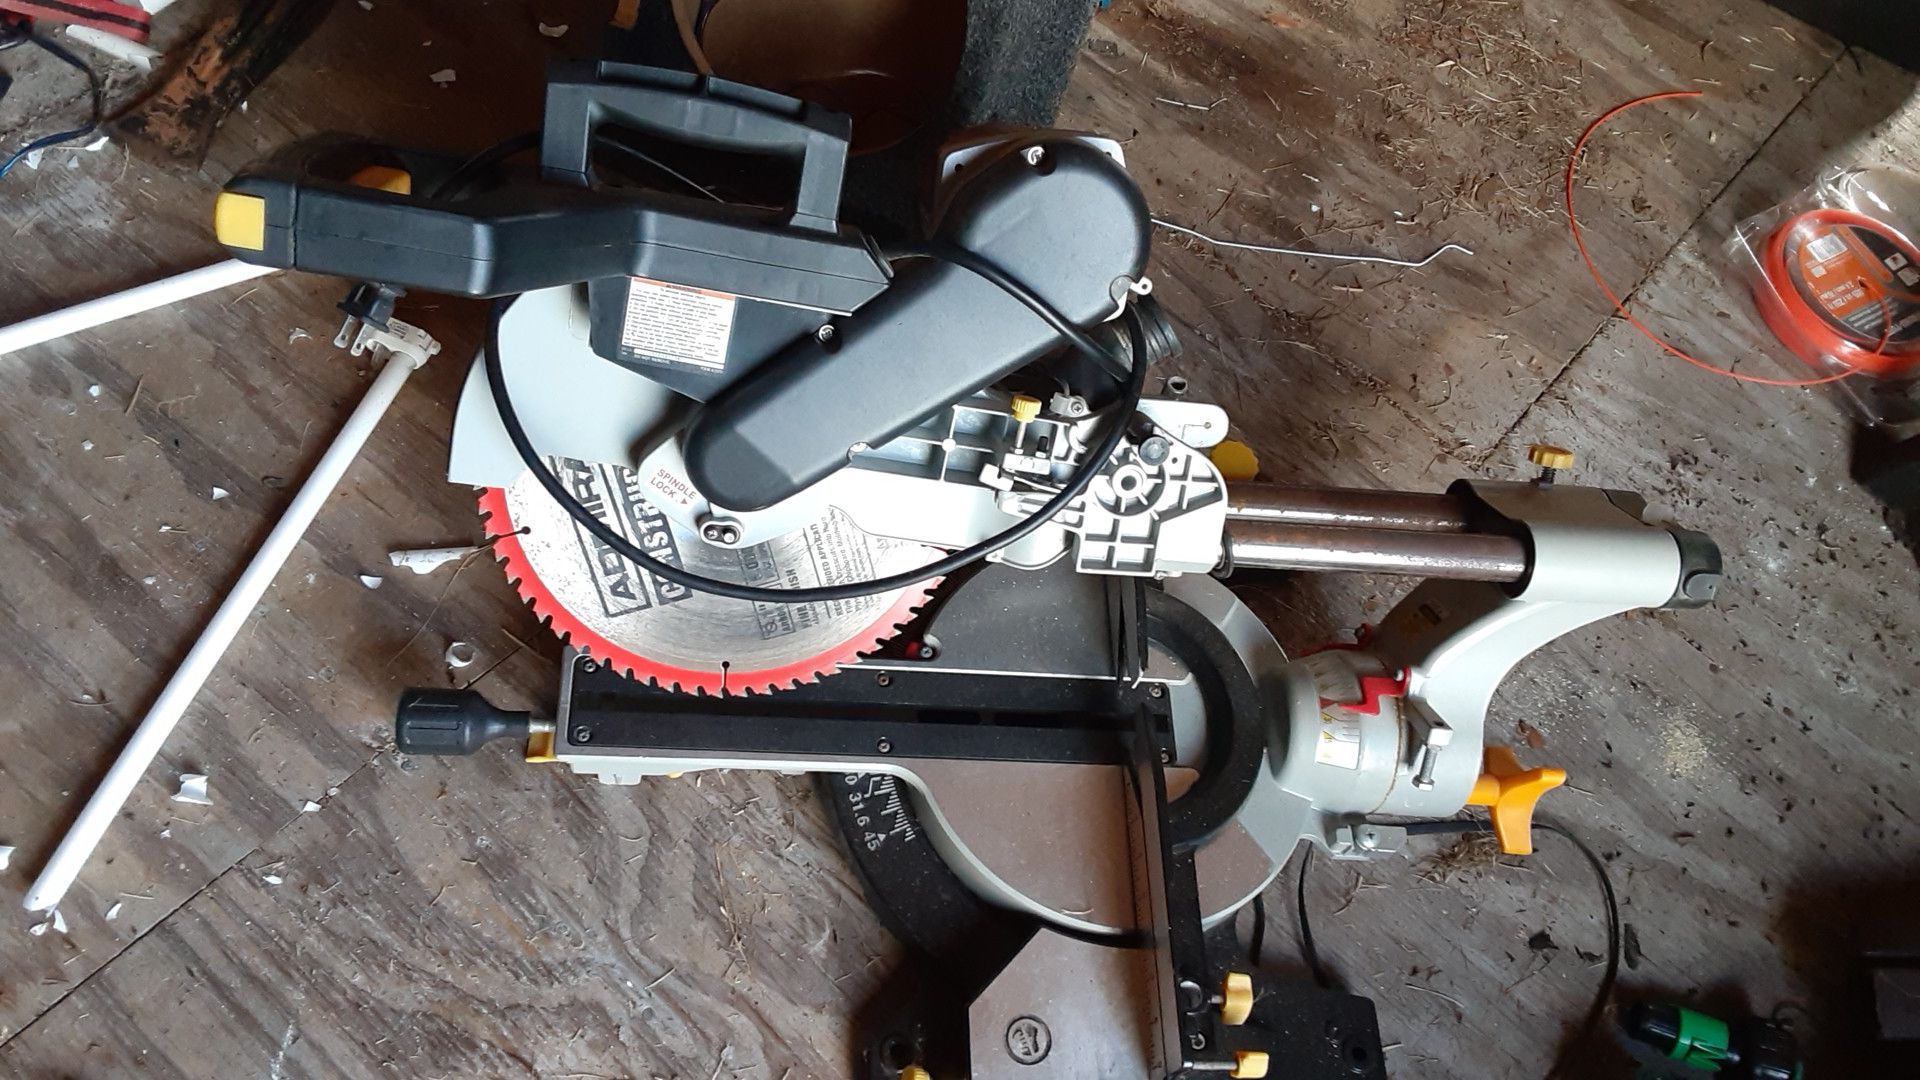 Miter saw on a bevel